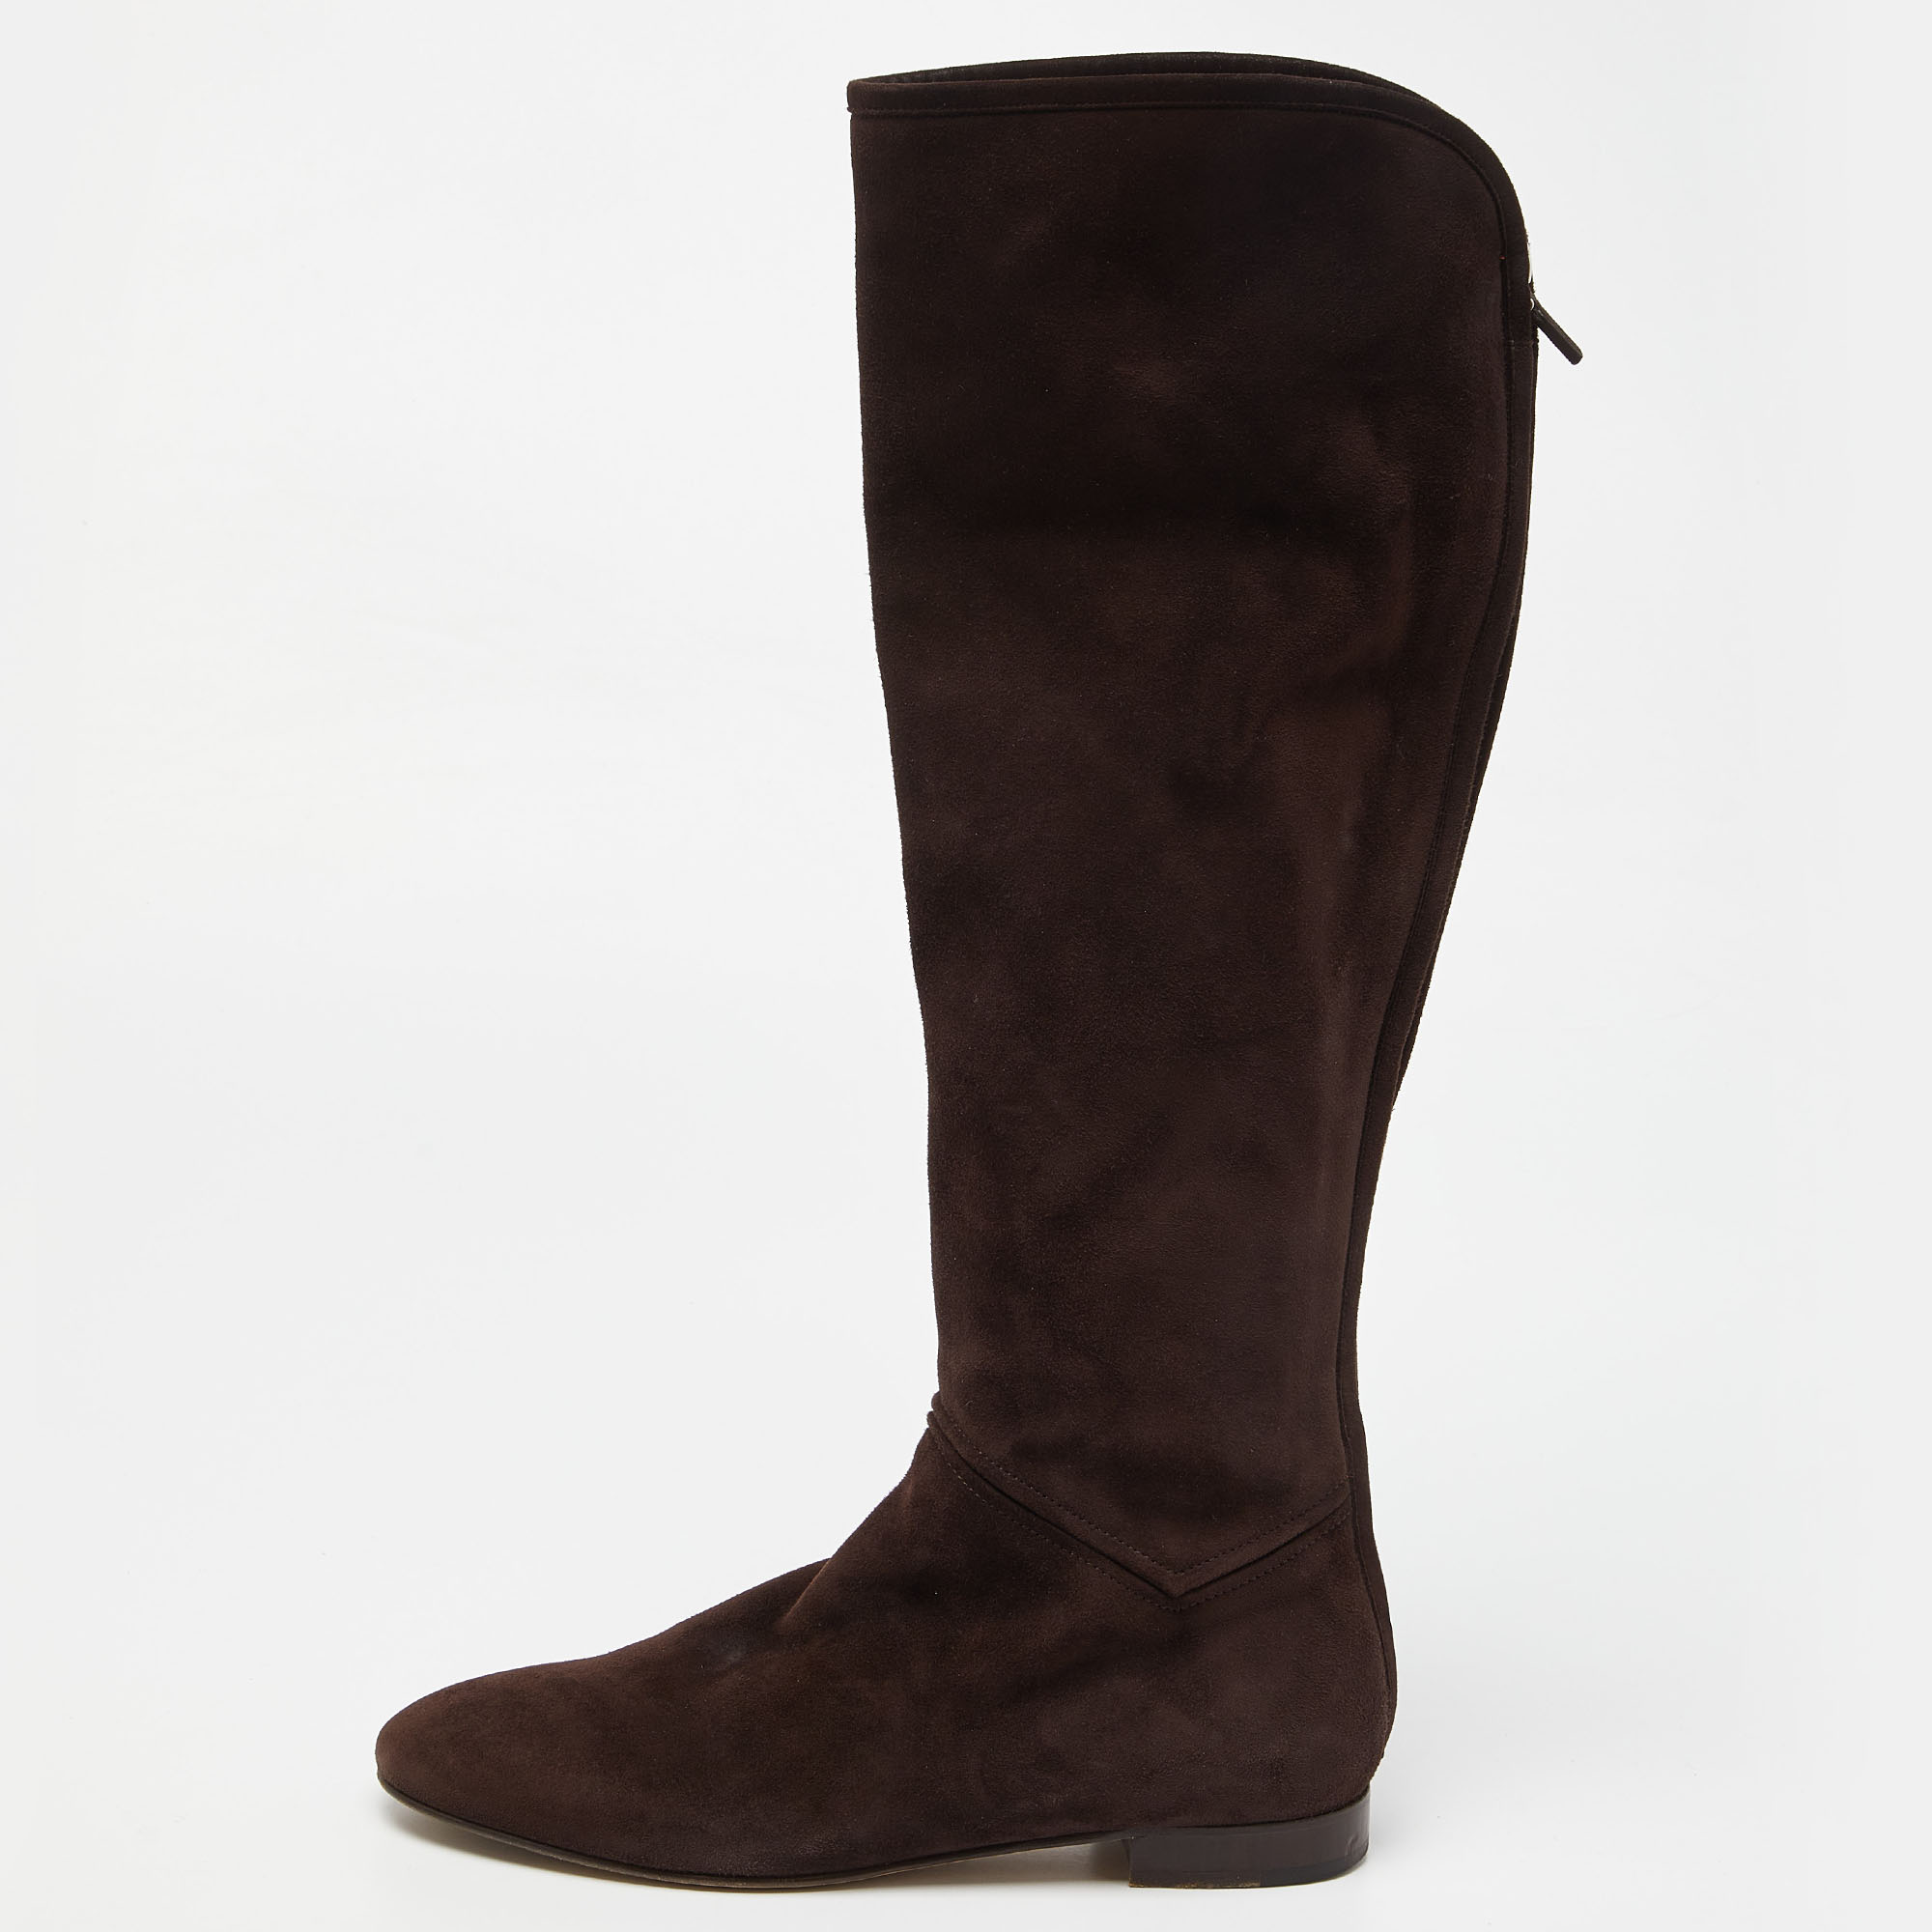 Loro piana brown suede knee length boots size 39